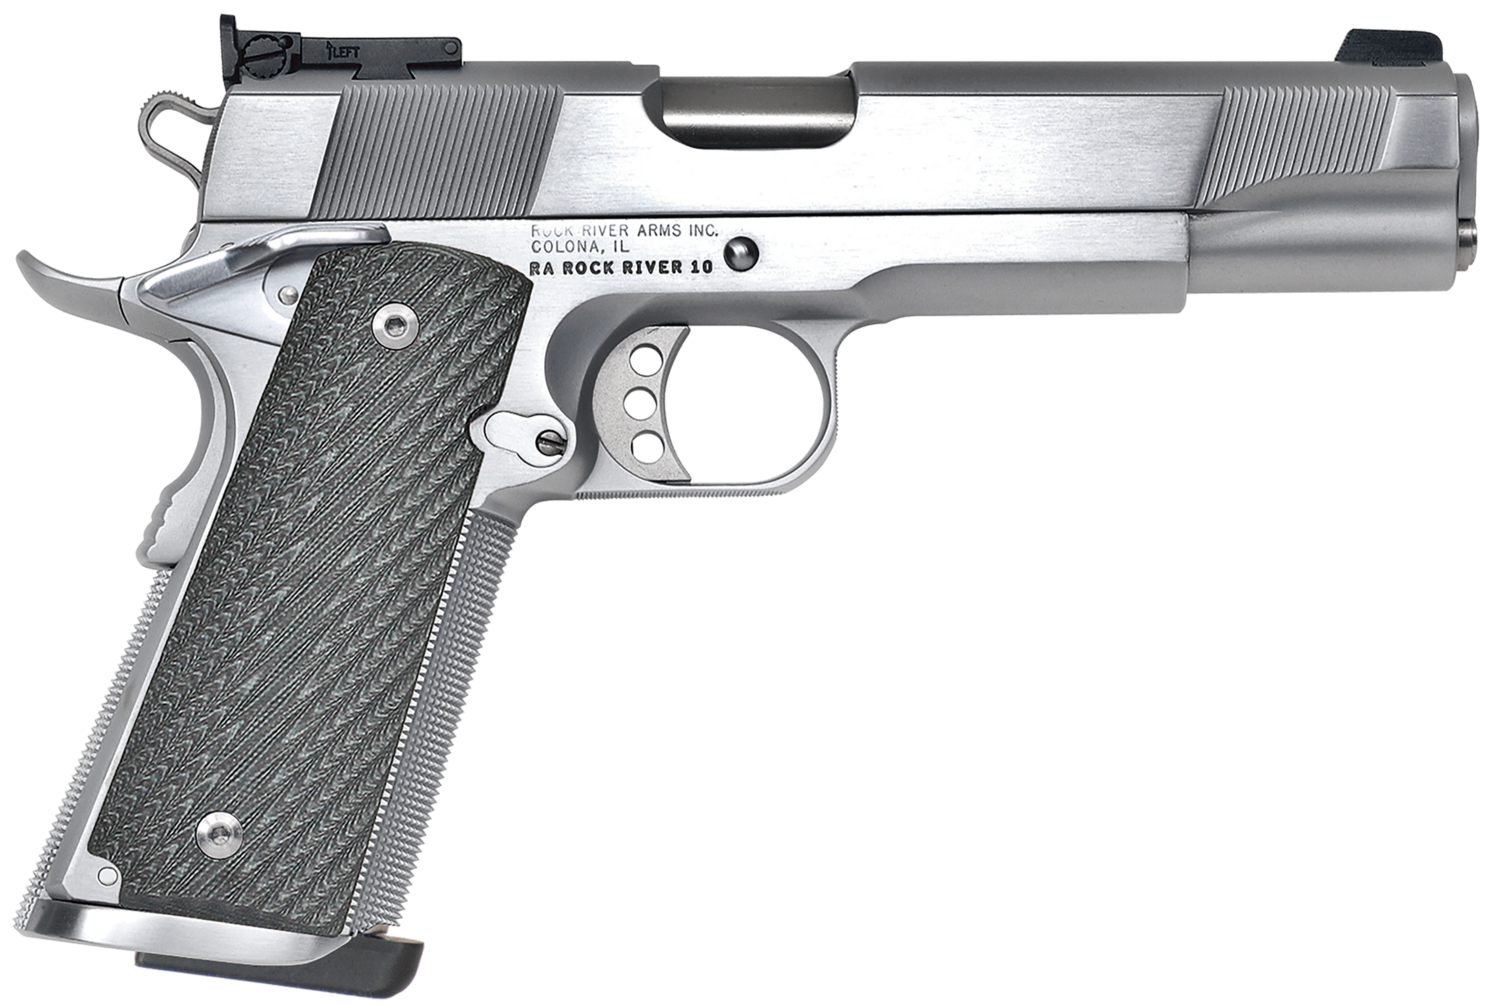 Rock River Arms PS2400 PS2400 Limited Match 45 ACP 7+1, 5" Stainless National Match Barrel, Brushed Chrome Serrated Steel Slide & Frame w/Beavertail, Black G10 Grip, Ambidextrous